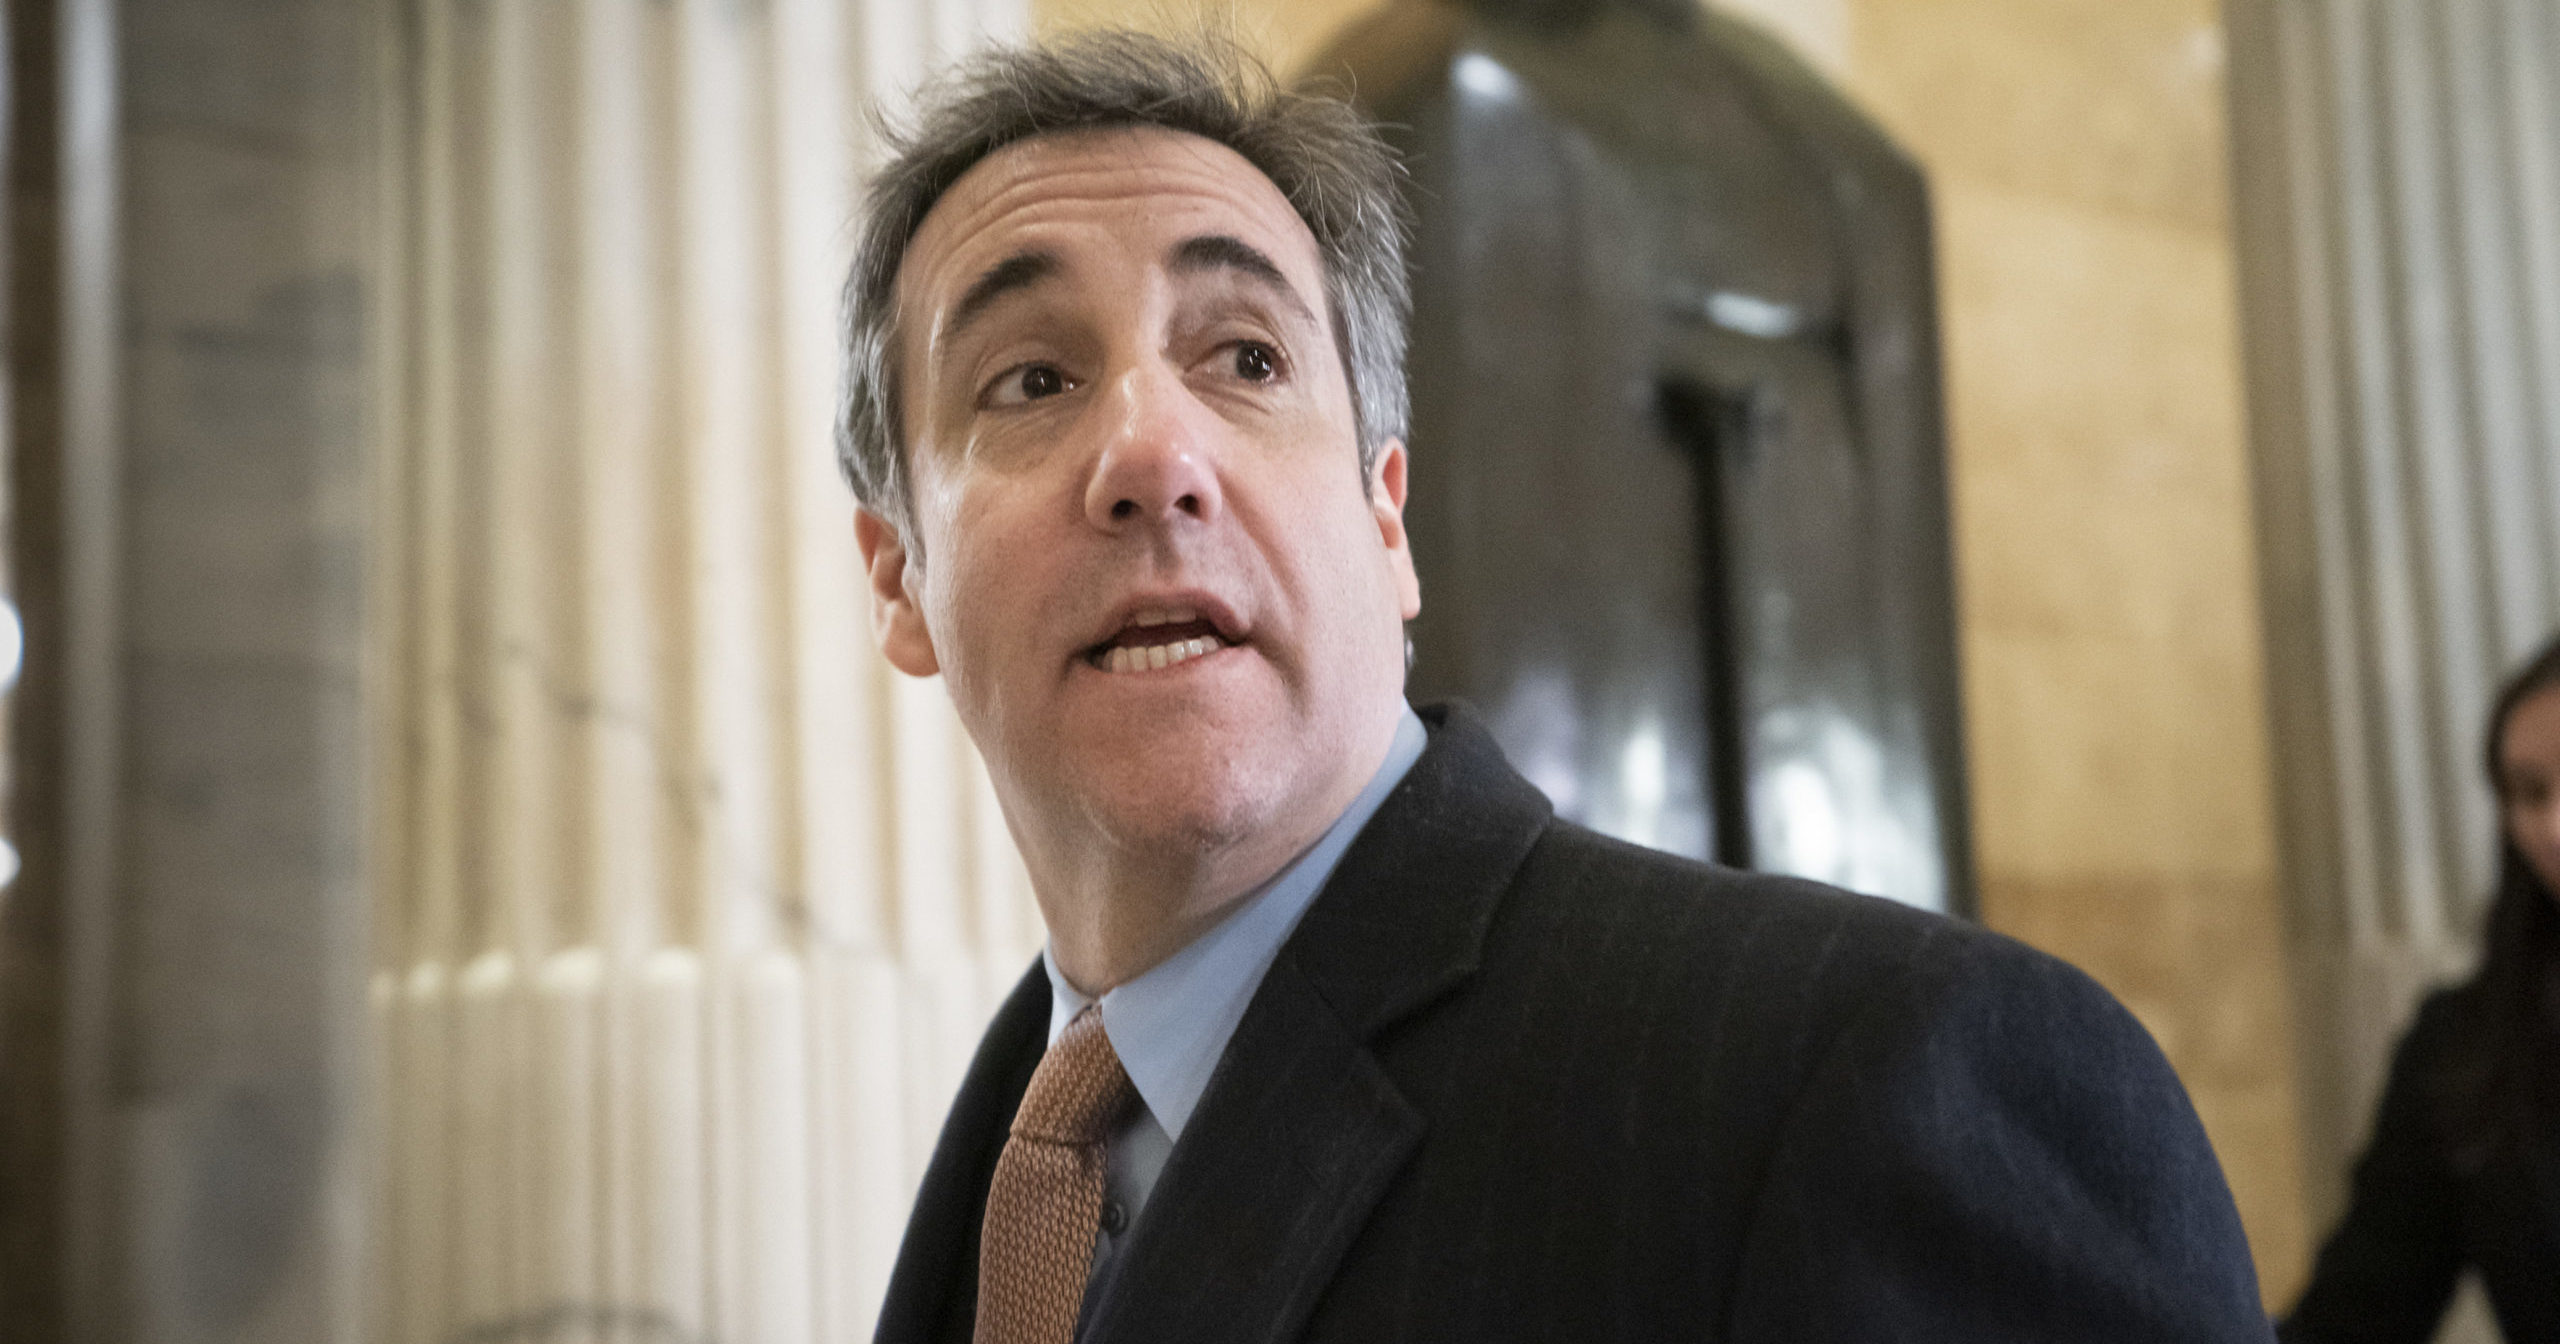 In this March 6, 2019, file photo, Michael Cohen, President Donald Trump's former lawyer, returns to testify on Capitol Hill in Washington, D.C.